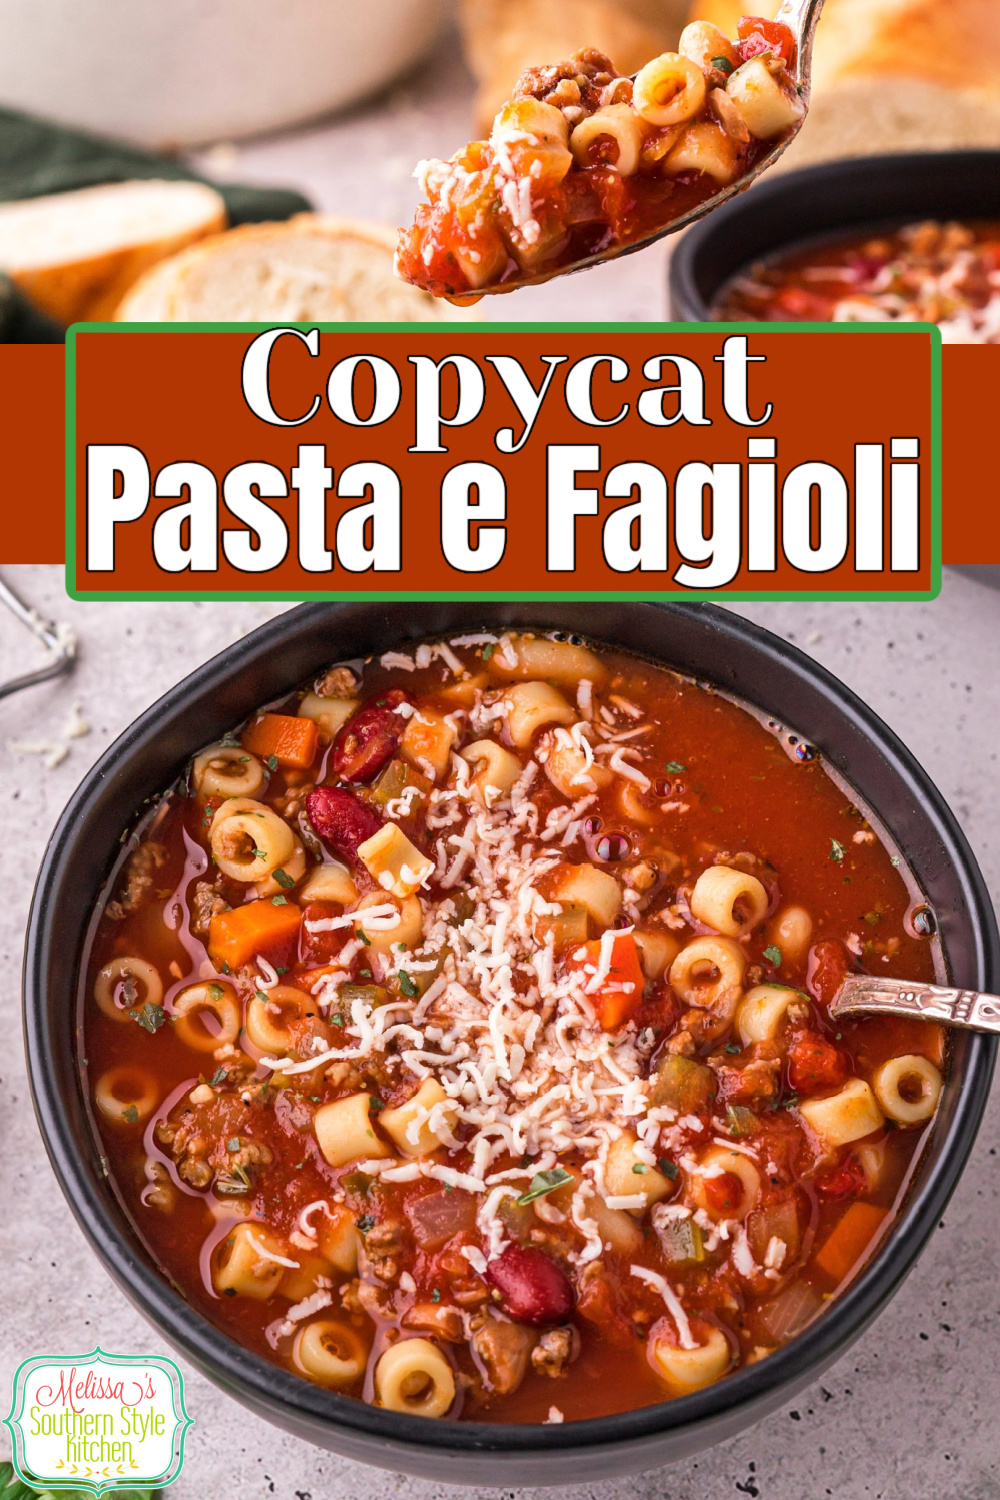 Pasta e Fagioli is hands down one of the most popular soups served at the Olive Garden. Now, you can make your own even better at home! #pastafagioli #soup #copycatolivegardenrecipes #soup #pastaefagioli #Italianrecipes #Italiansoup via @melissasssk